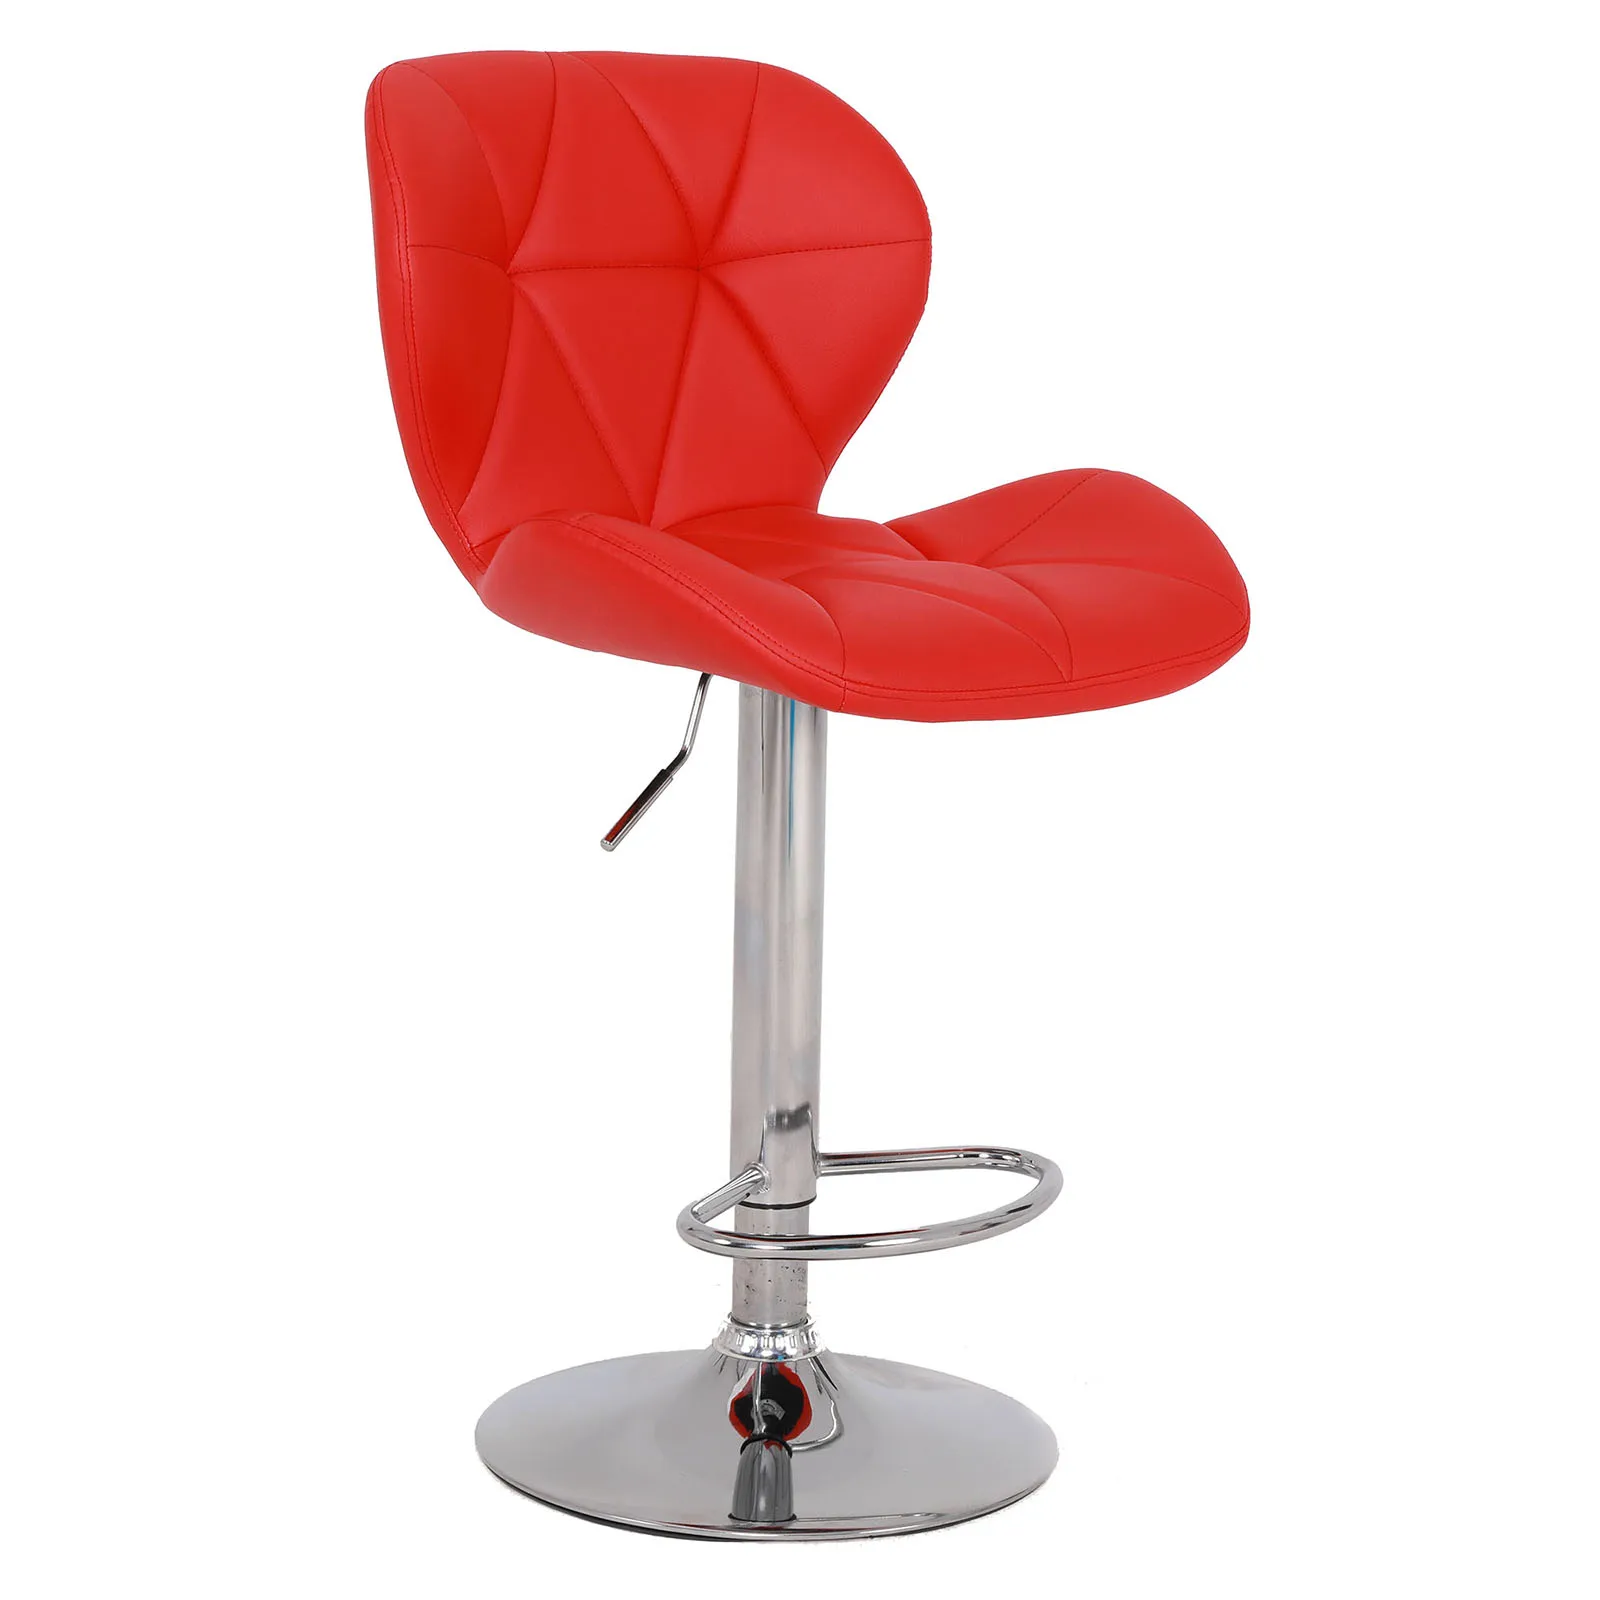 2 Pieces Bar Chair Scandinavian Design Swivel Lift Suitable for Dining and Kitchen Bar Chairs Red/Gray/Brown[US-Stock]